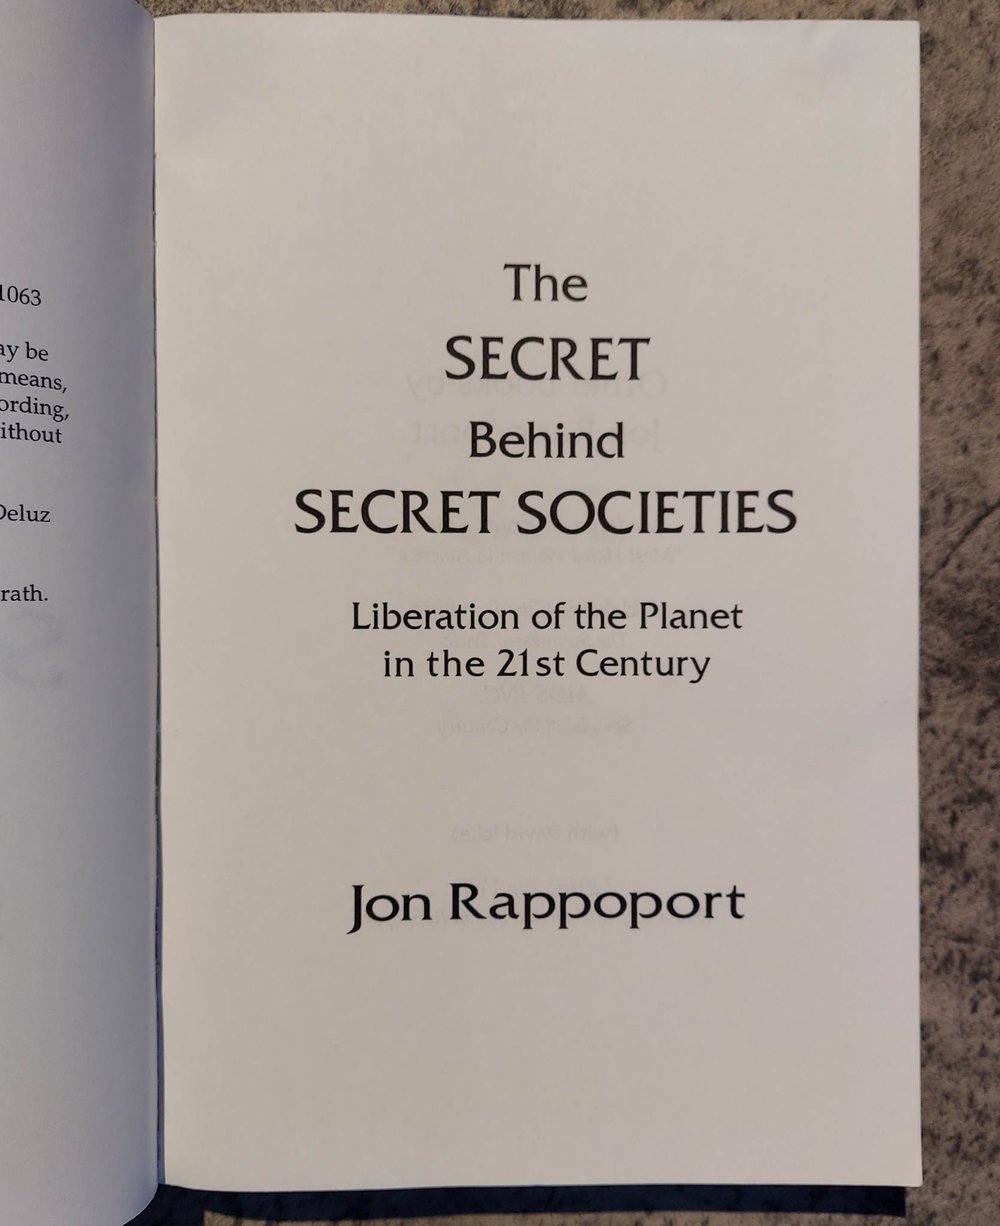 The Secret Behind Secret Societies: Liberation of the Planet in the 21st Century, by Jon Rappoport